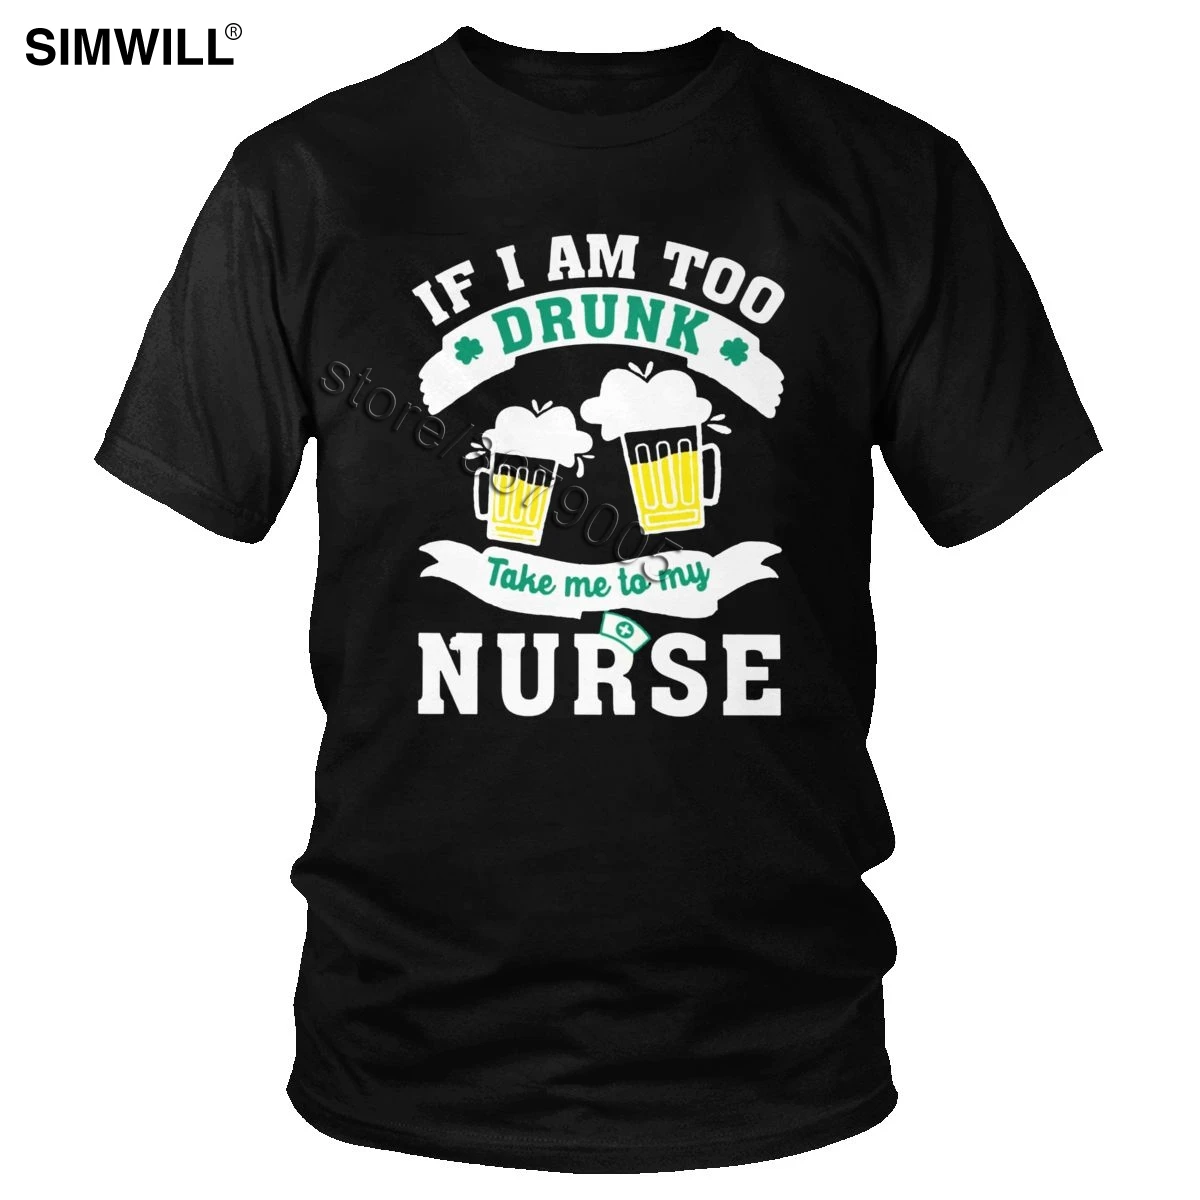 

If I Am Too Drunk Take Me To My Nurse T Shirts Men's Cotton Drink Beer Cheers Tshirt Funny Short Sleeve O Neck Summer Tees